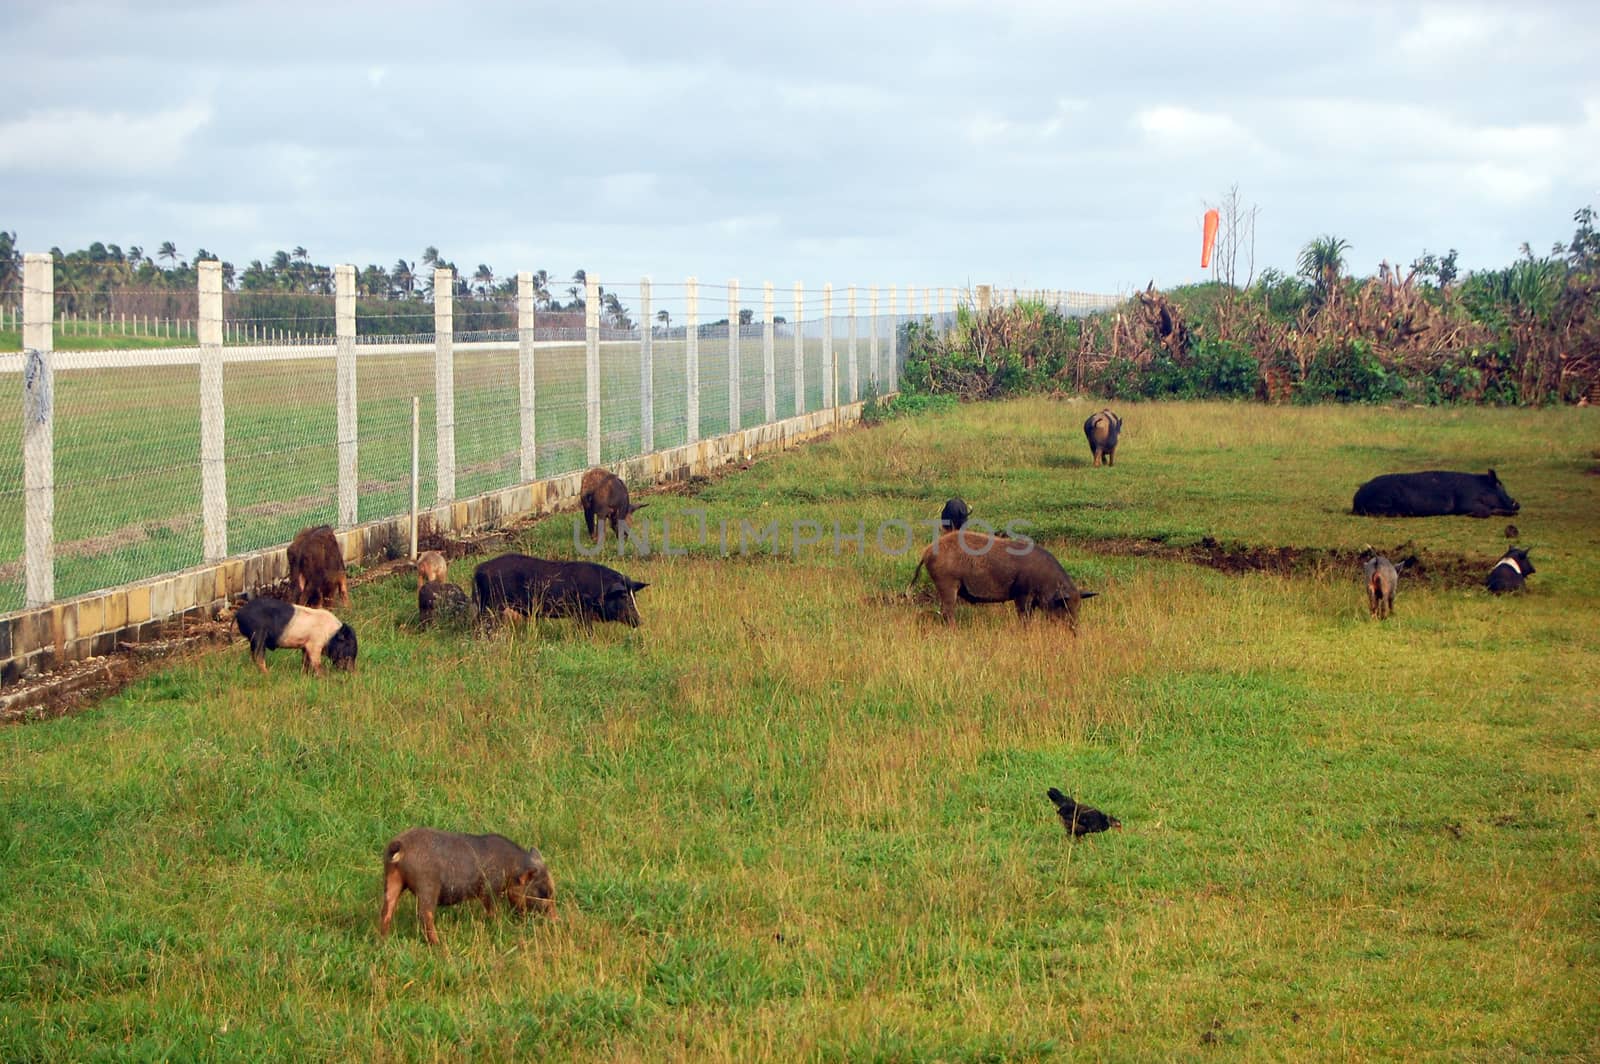 Pigs at field near airport fence Polynesia by danemo